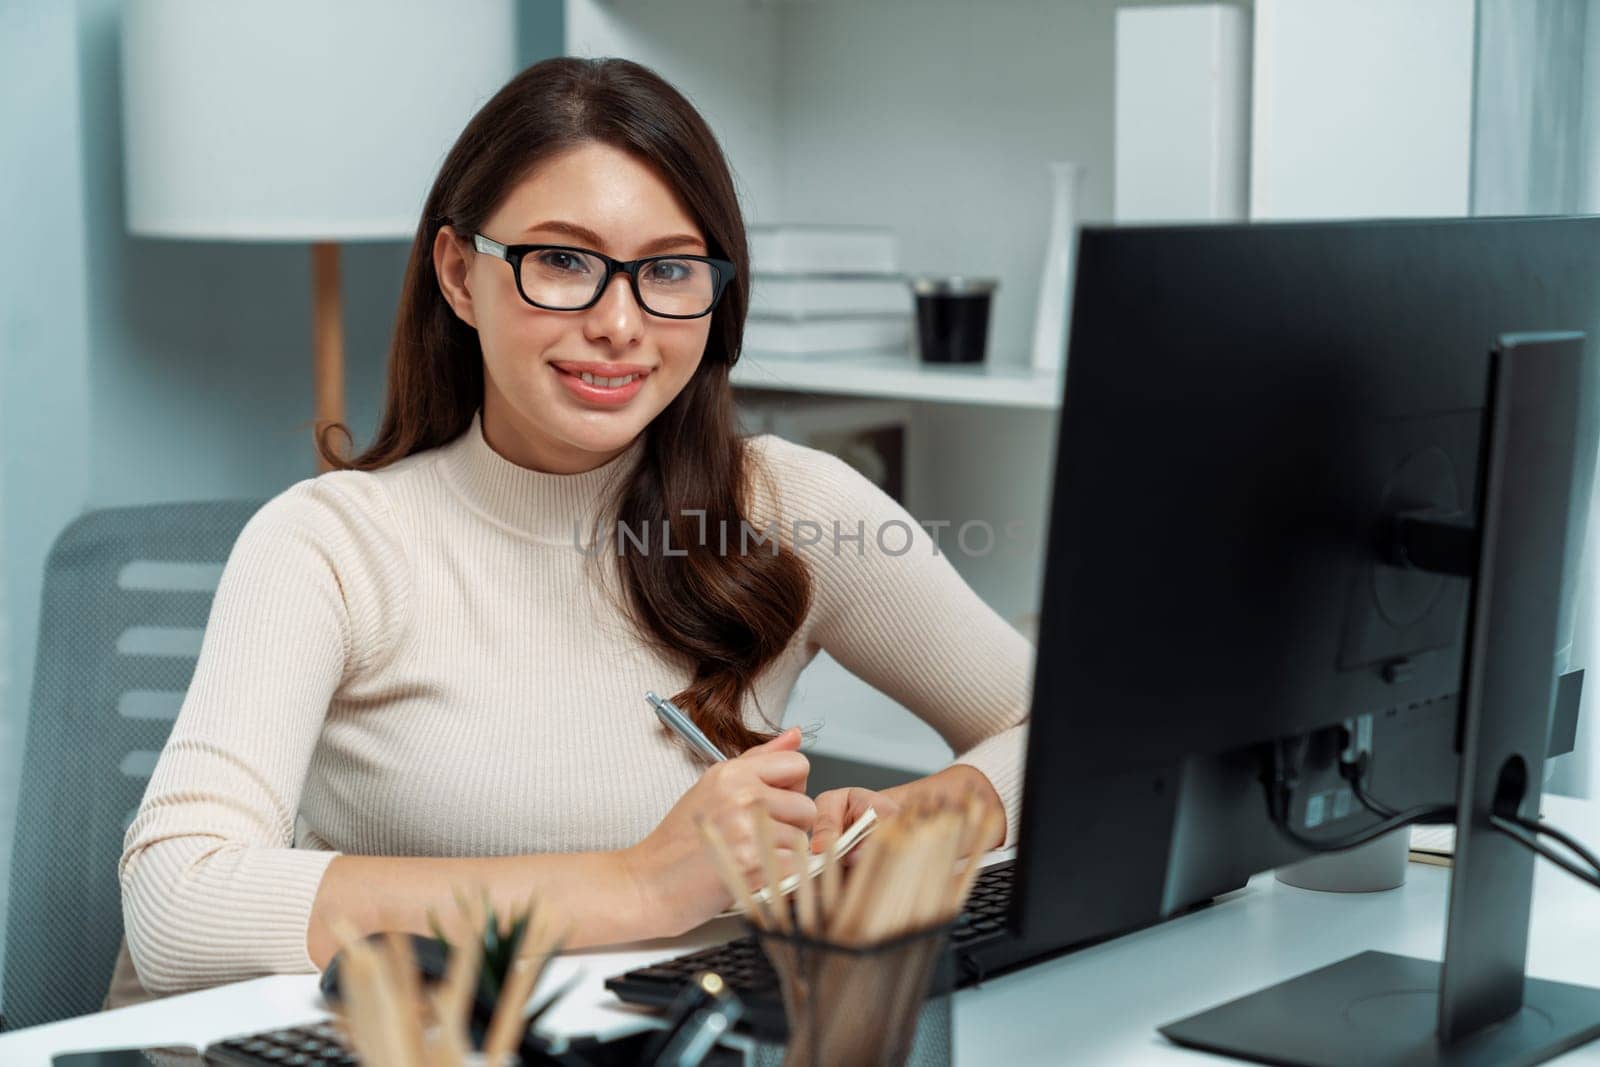 Portrait casual outfit smiling beautiful woman looking camera to pose for business profile while working on desk surrounded pc and stationary theme of positive new generation modern office. Postulate.